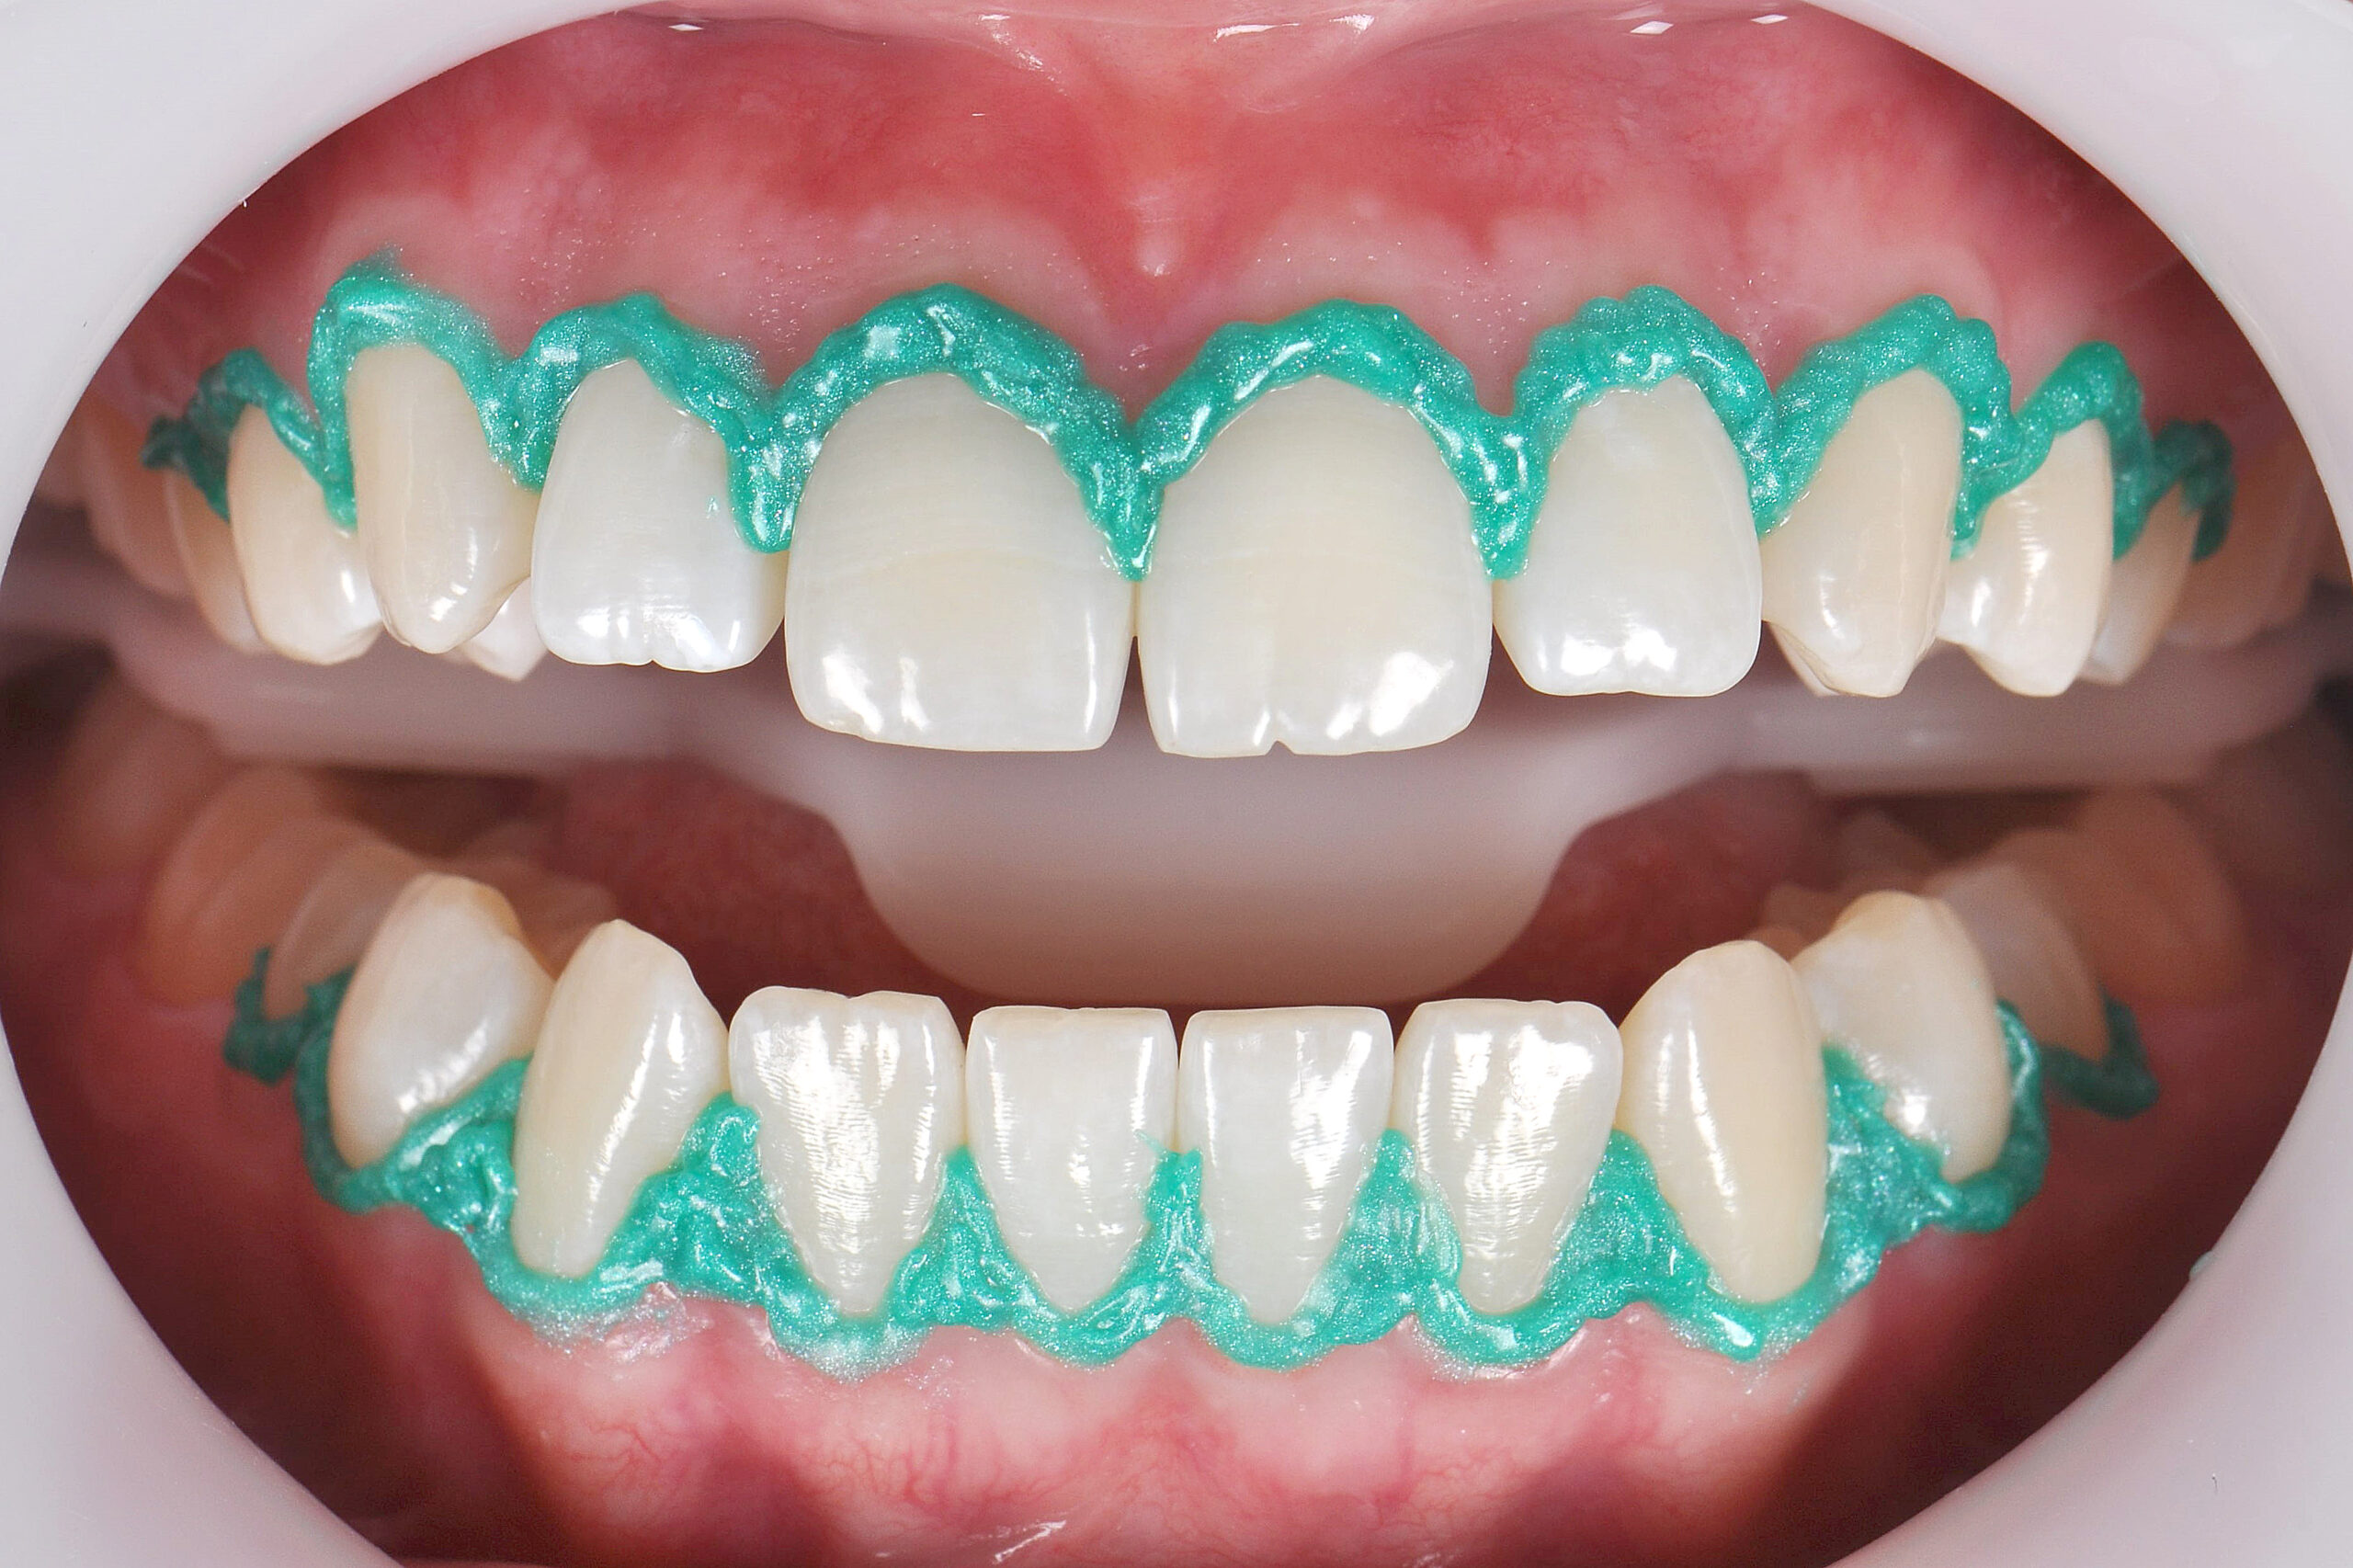 4 | Labial retractor in position and application of the Top dam Green gingival barrier.